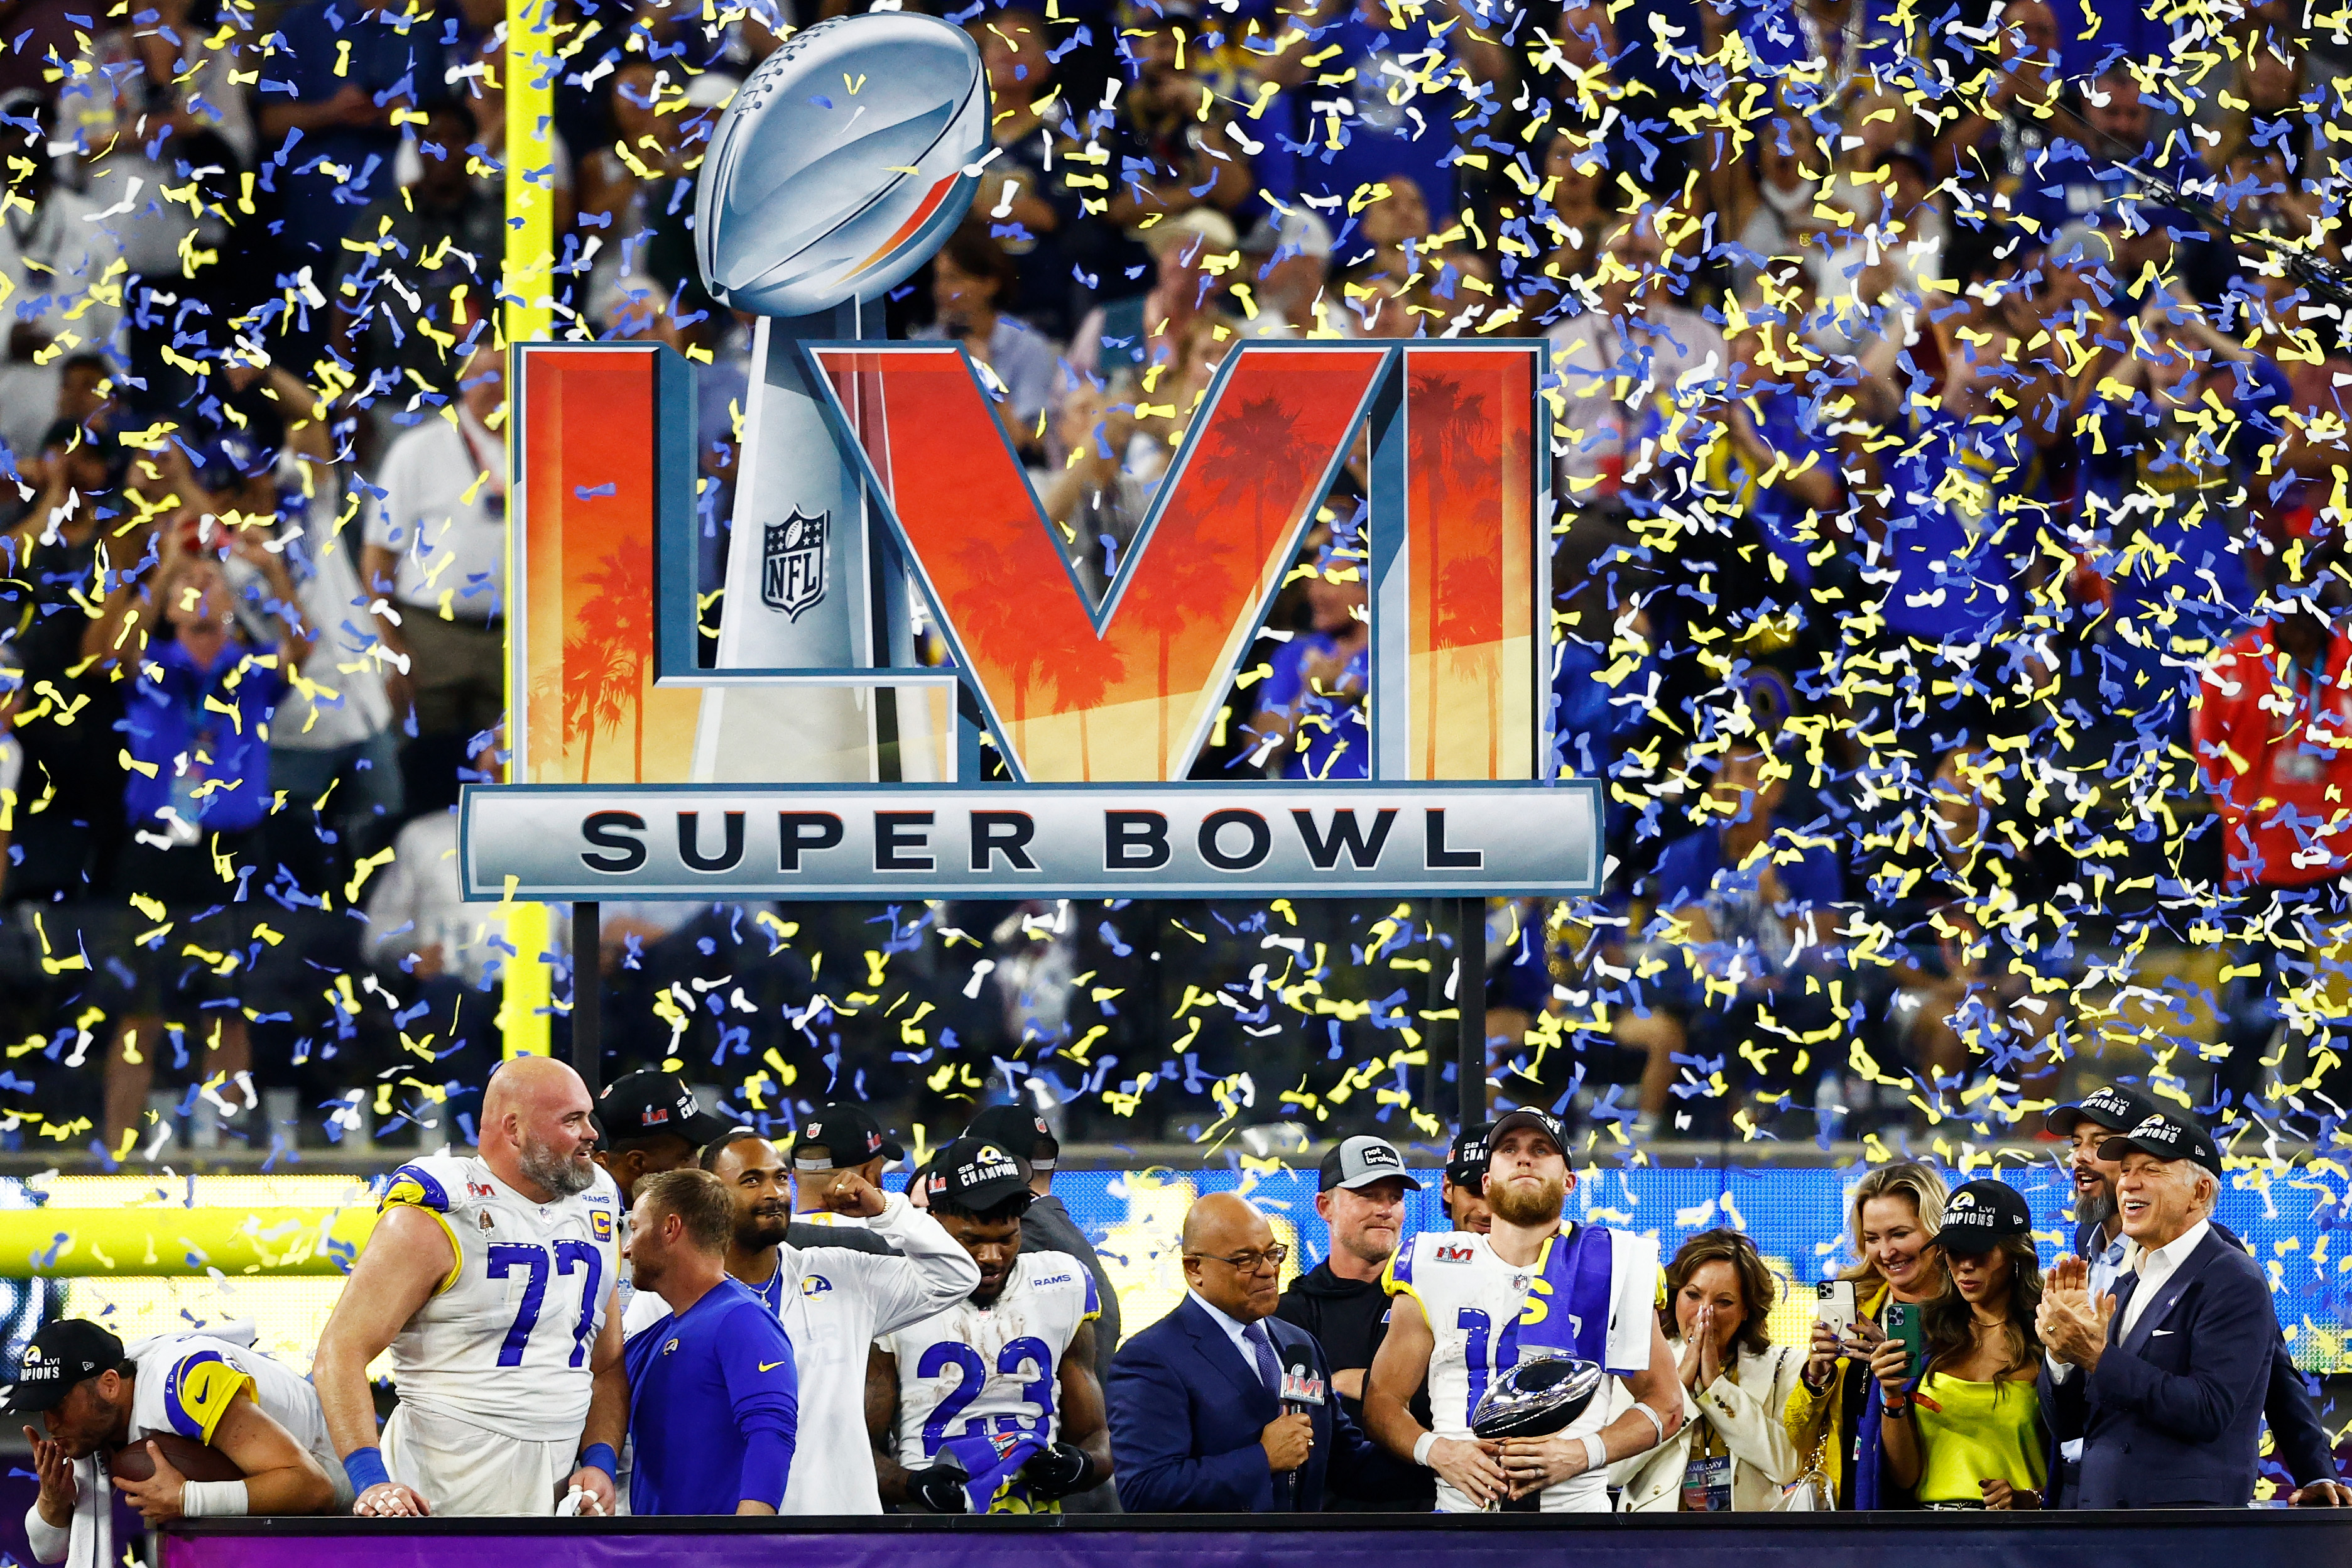 Super Bowl MVPs: A Complete List from Super Bowl I to LVII